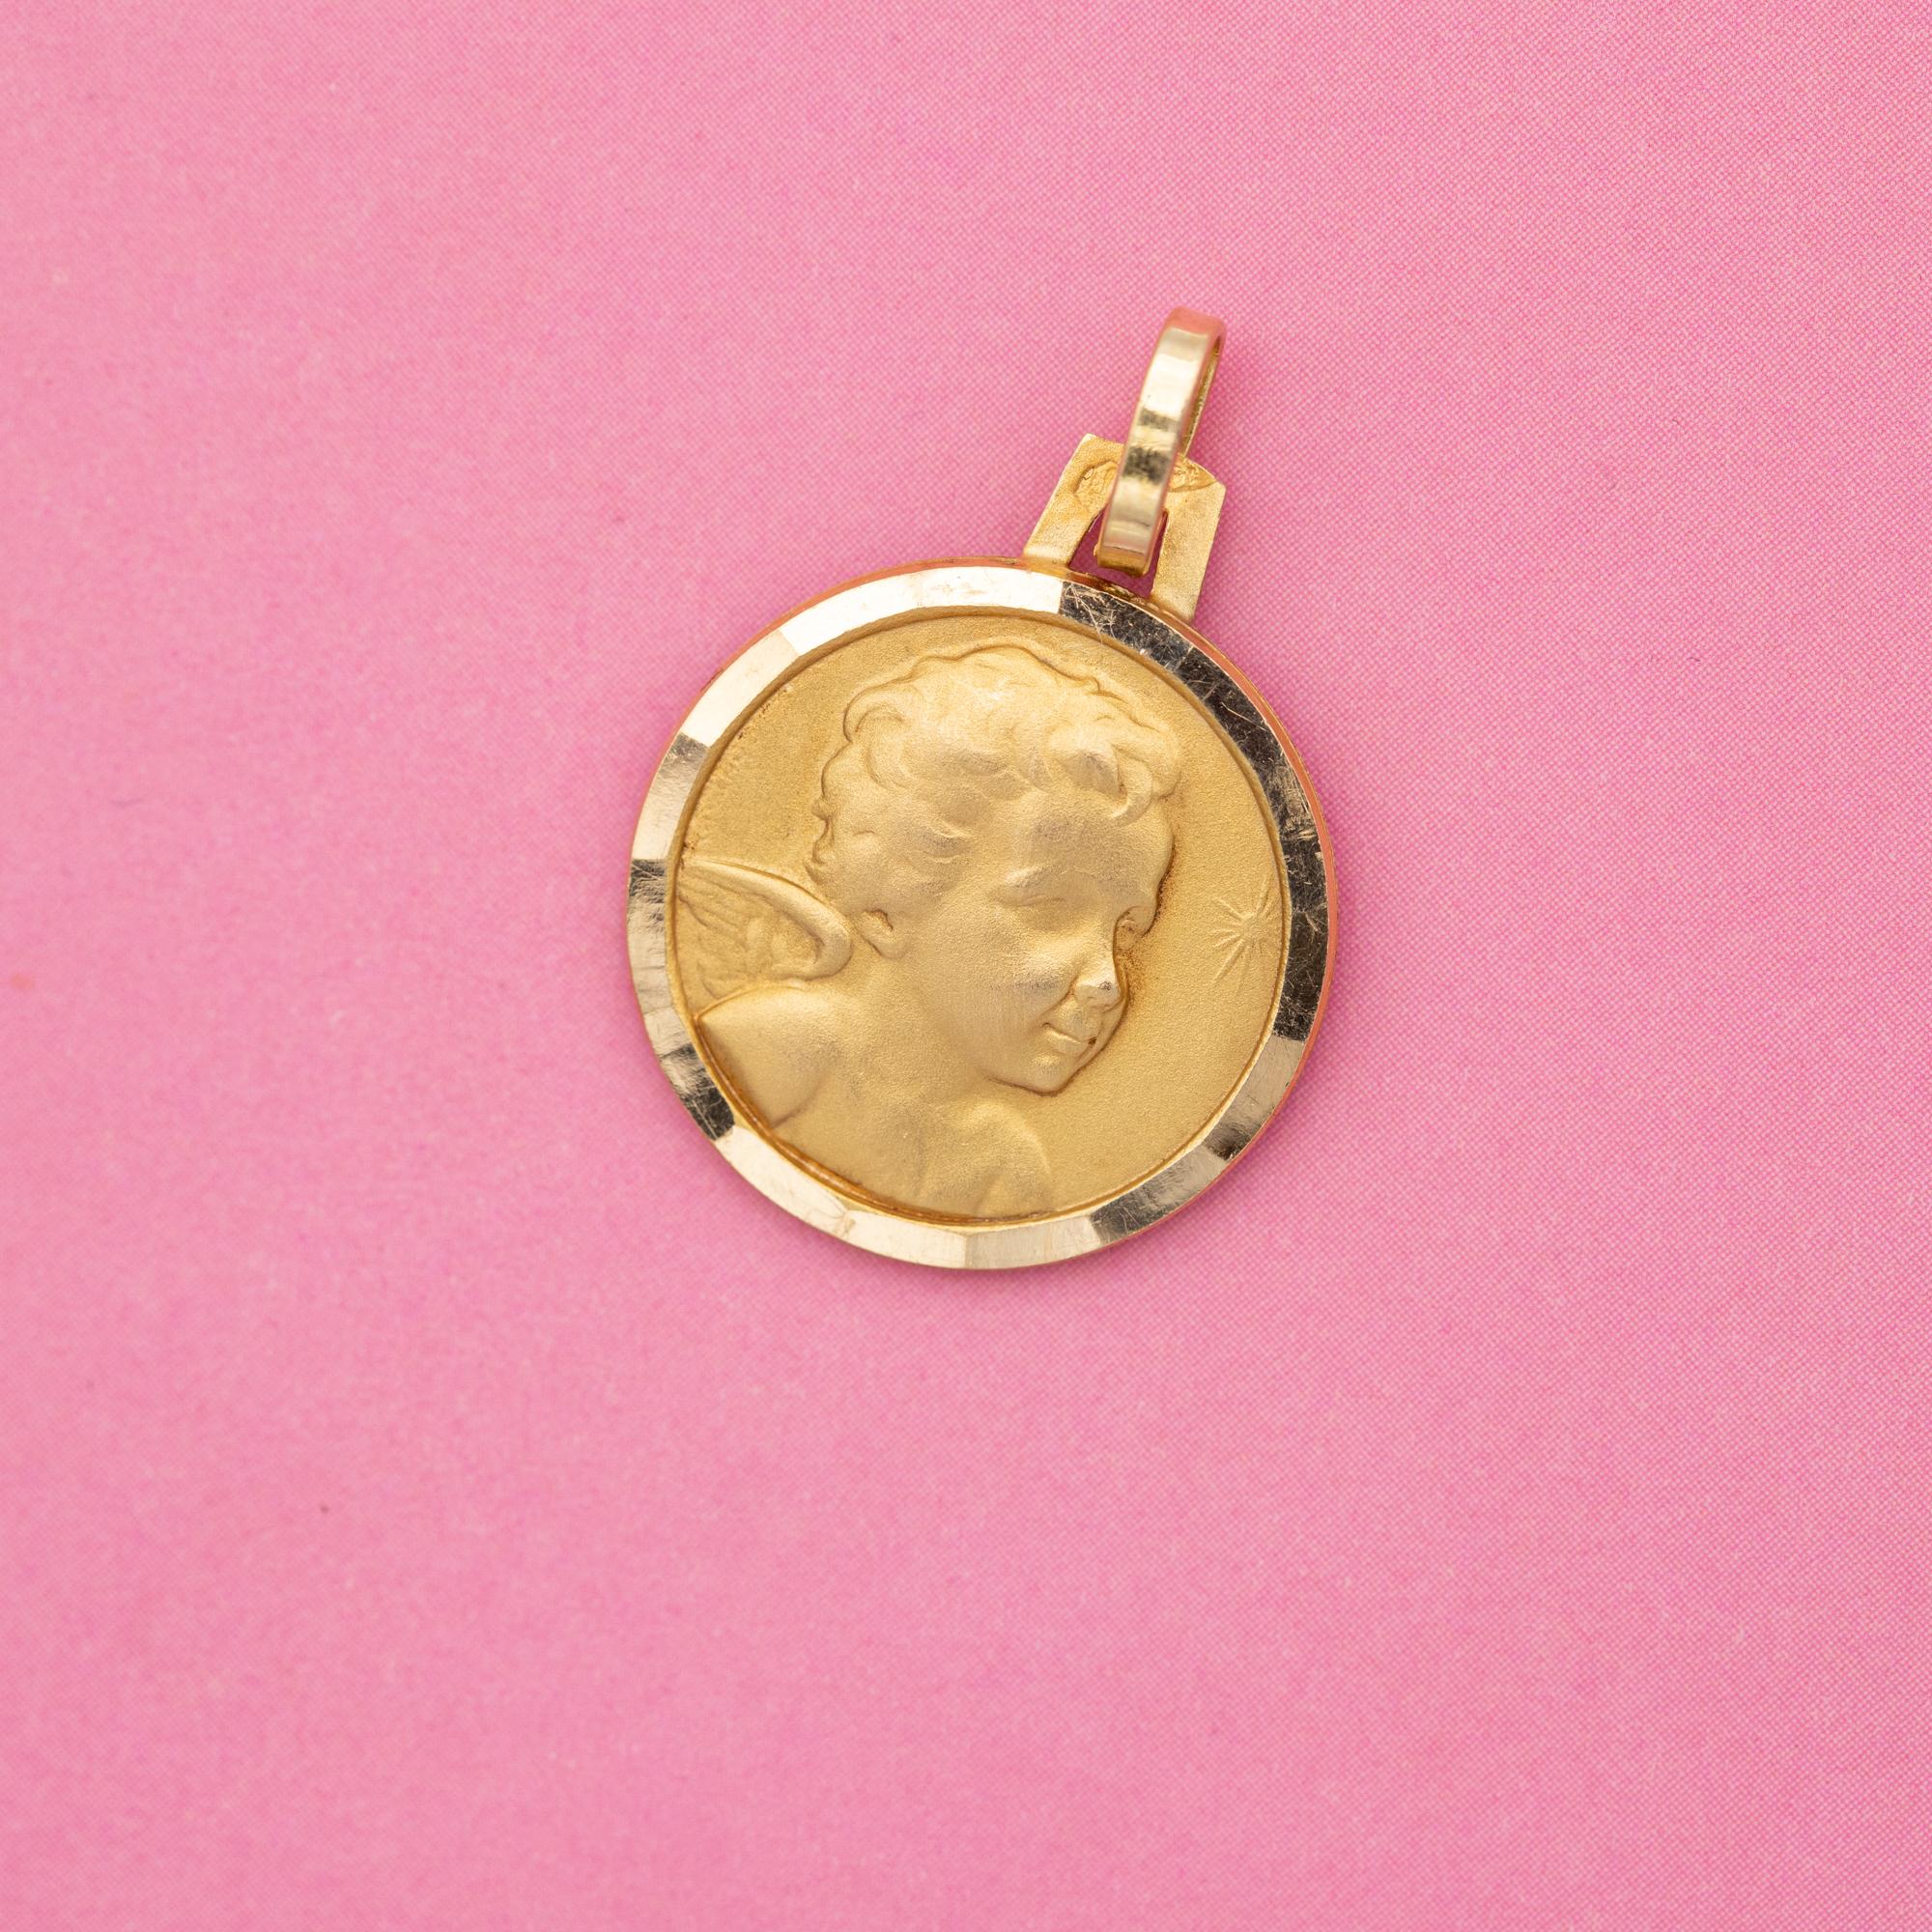  18k French Vintage cherub charm pendant - Angel medallion - solid yellow gold In Good Condition For Sale In Antwerp, BE